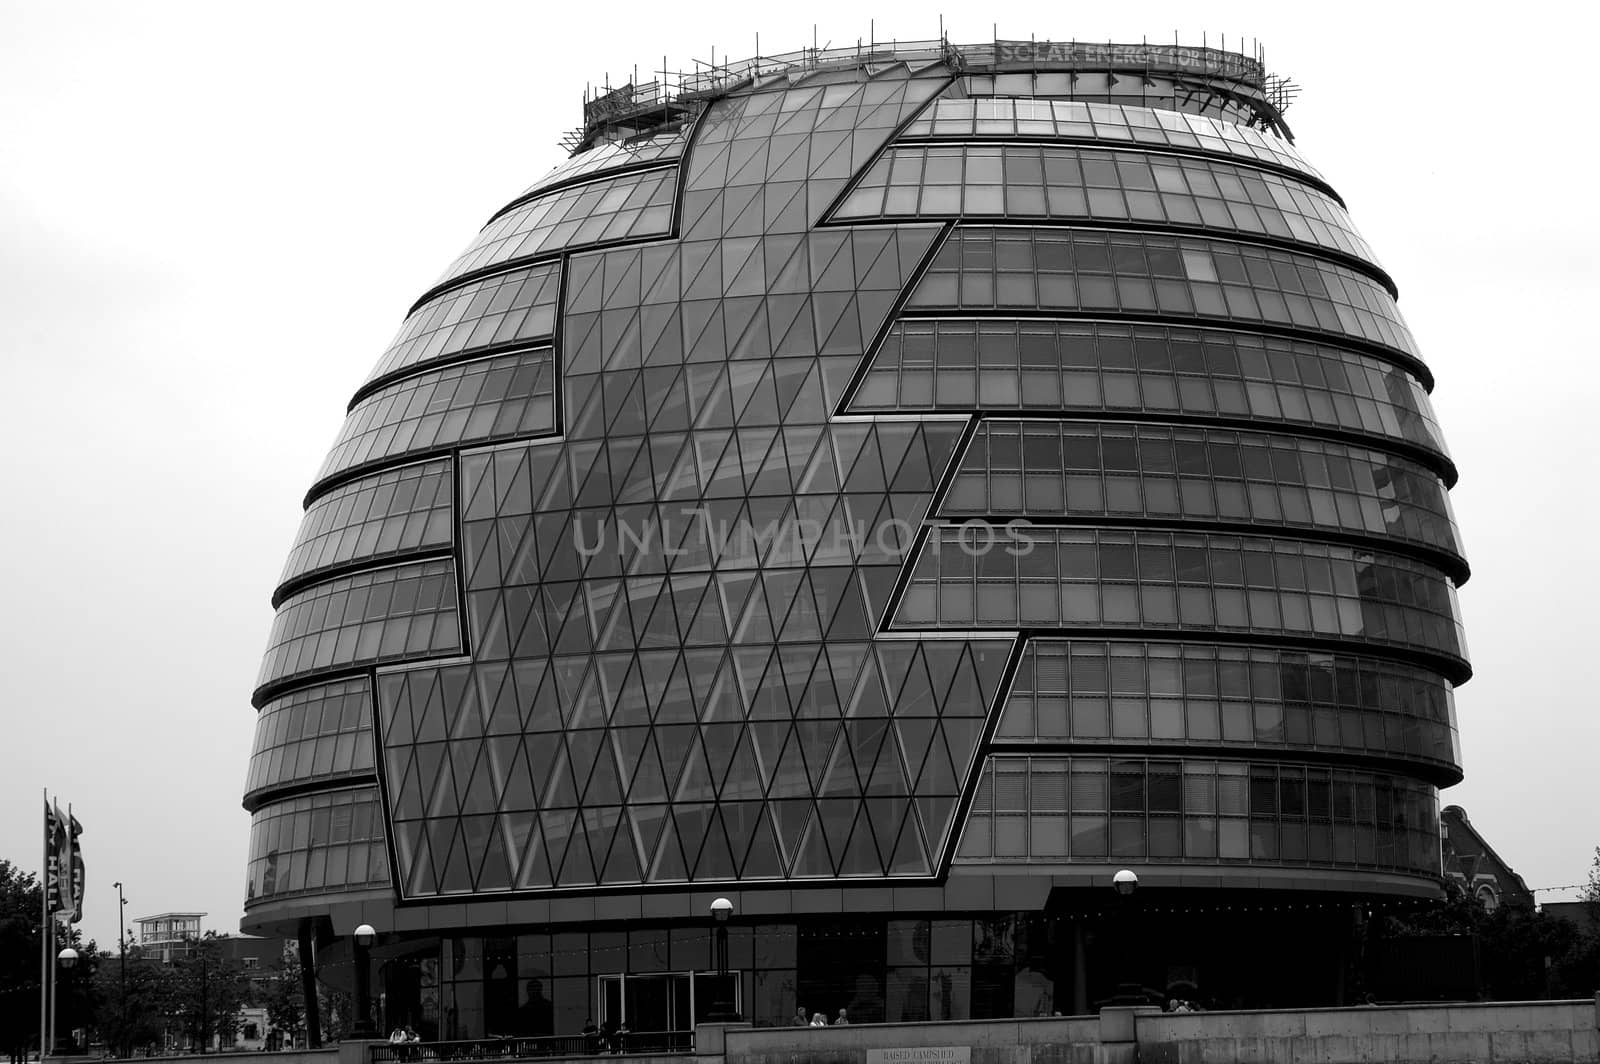 London Assembly Building by eugenef